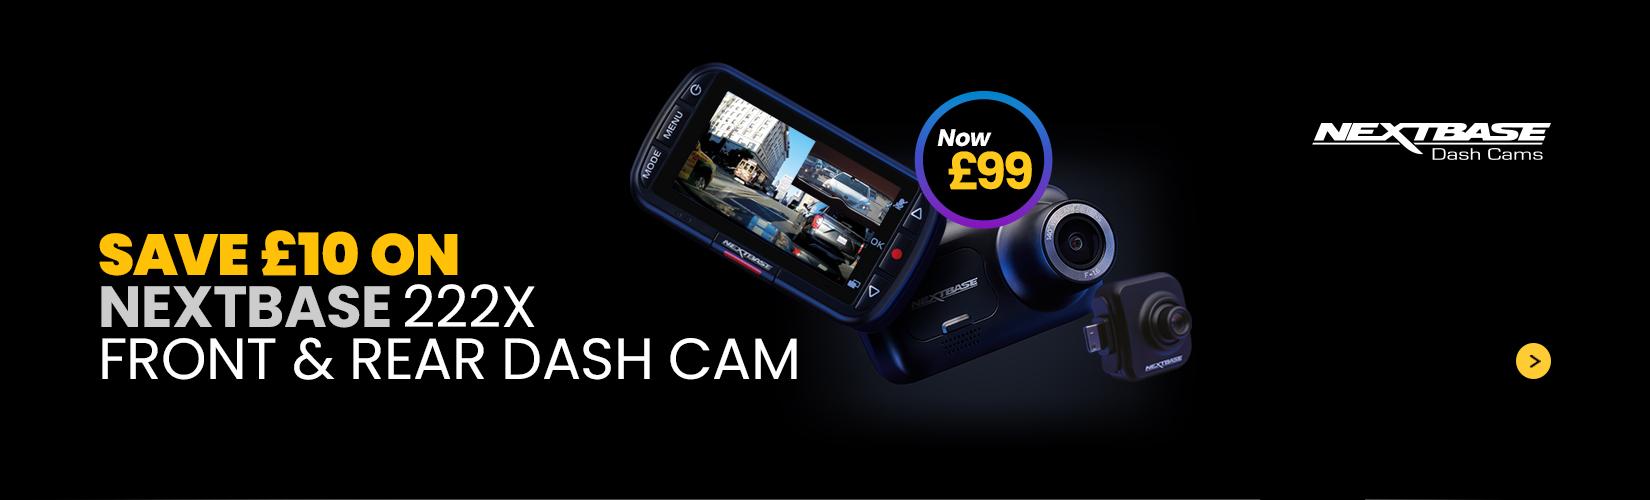 Nextbase. Save £10 on Nextbase 222X front and rear dash cam.